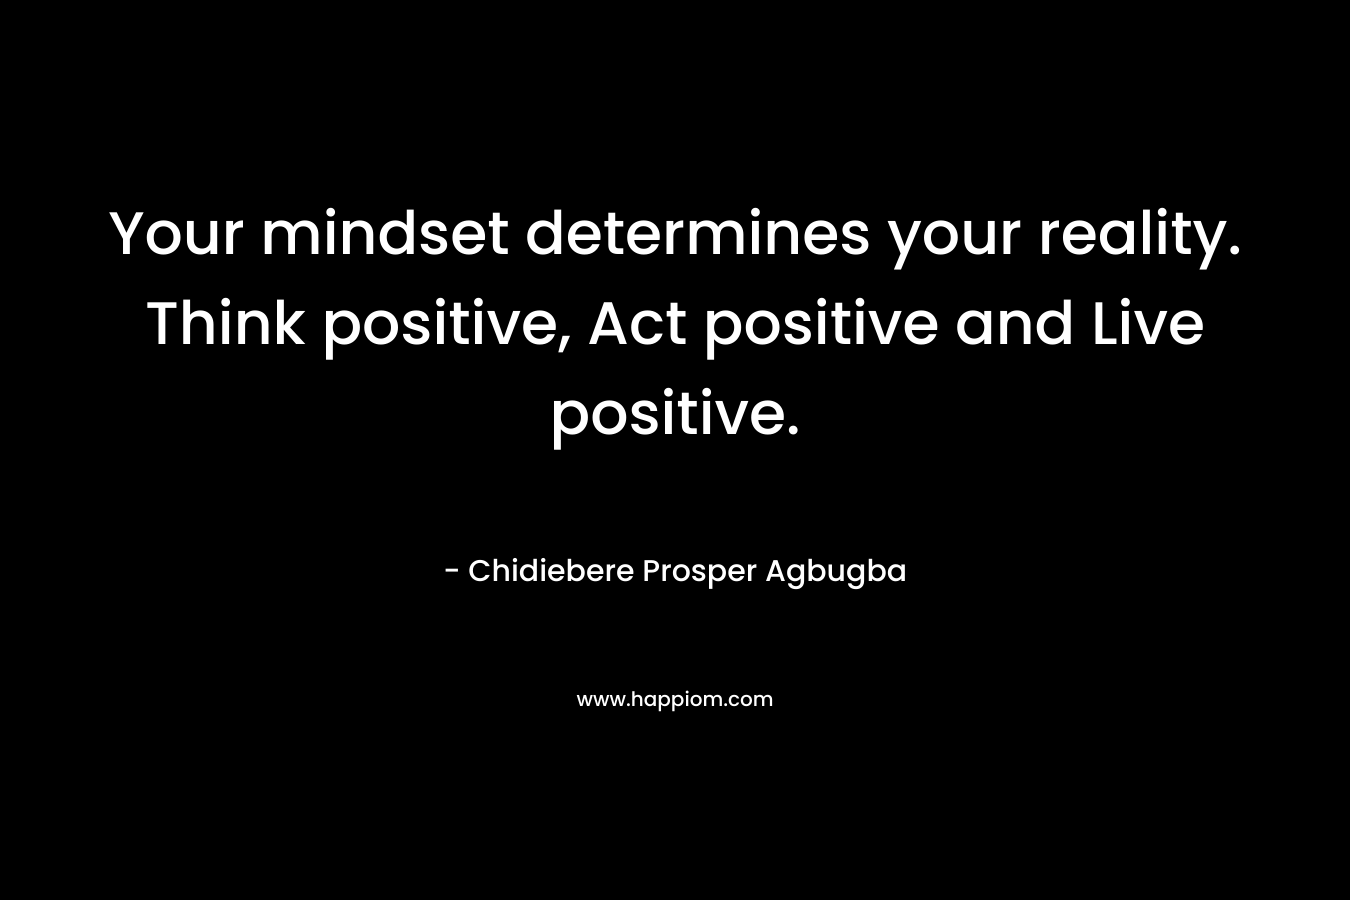 Your mindset determines your reality. Think positive, Act positive and Live positive.